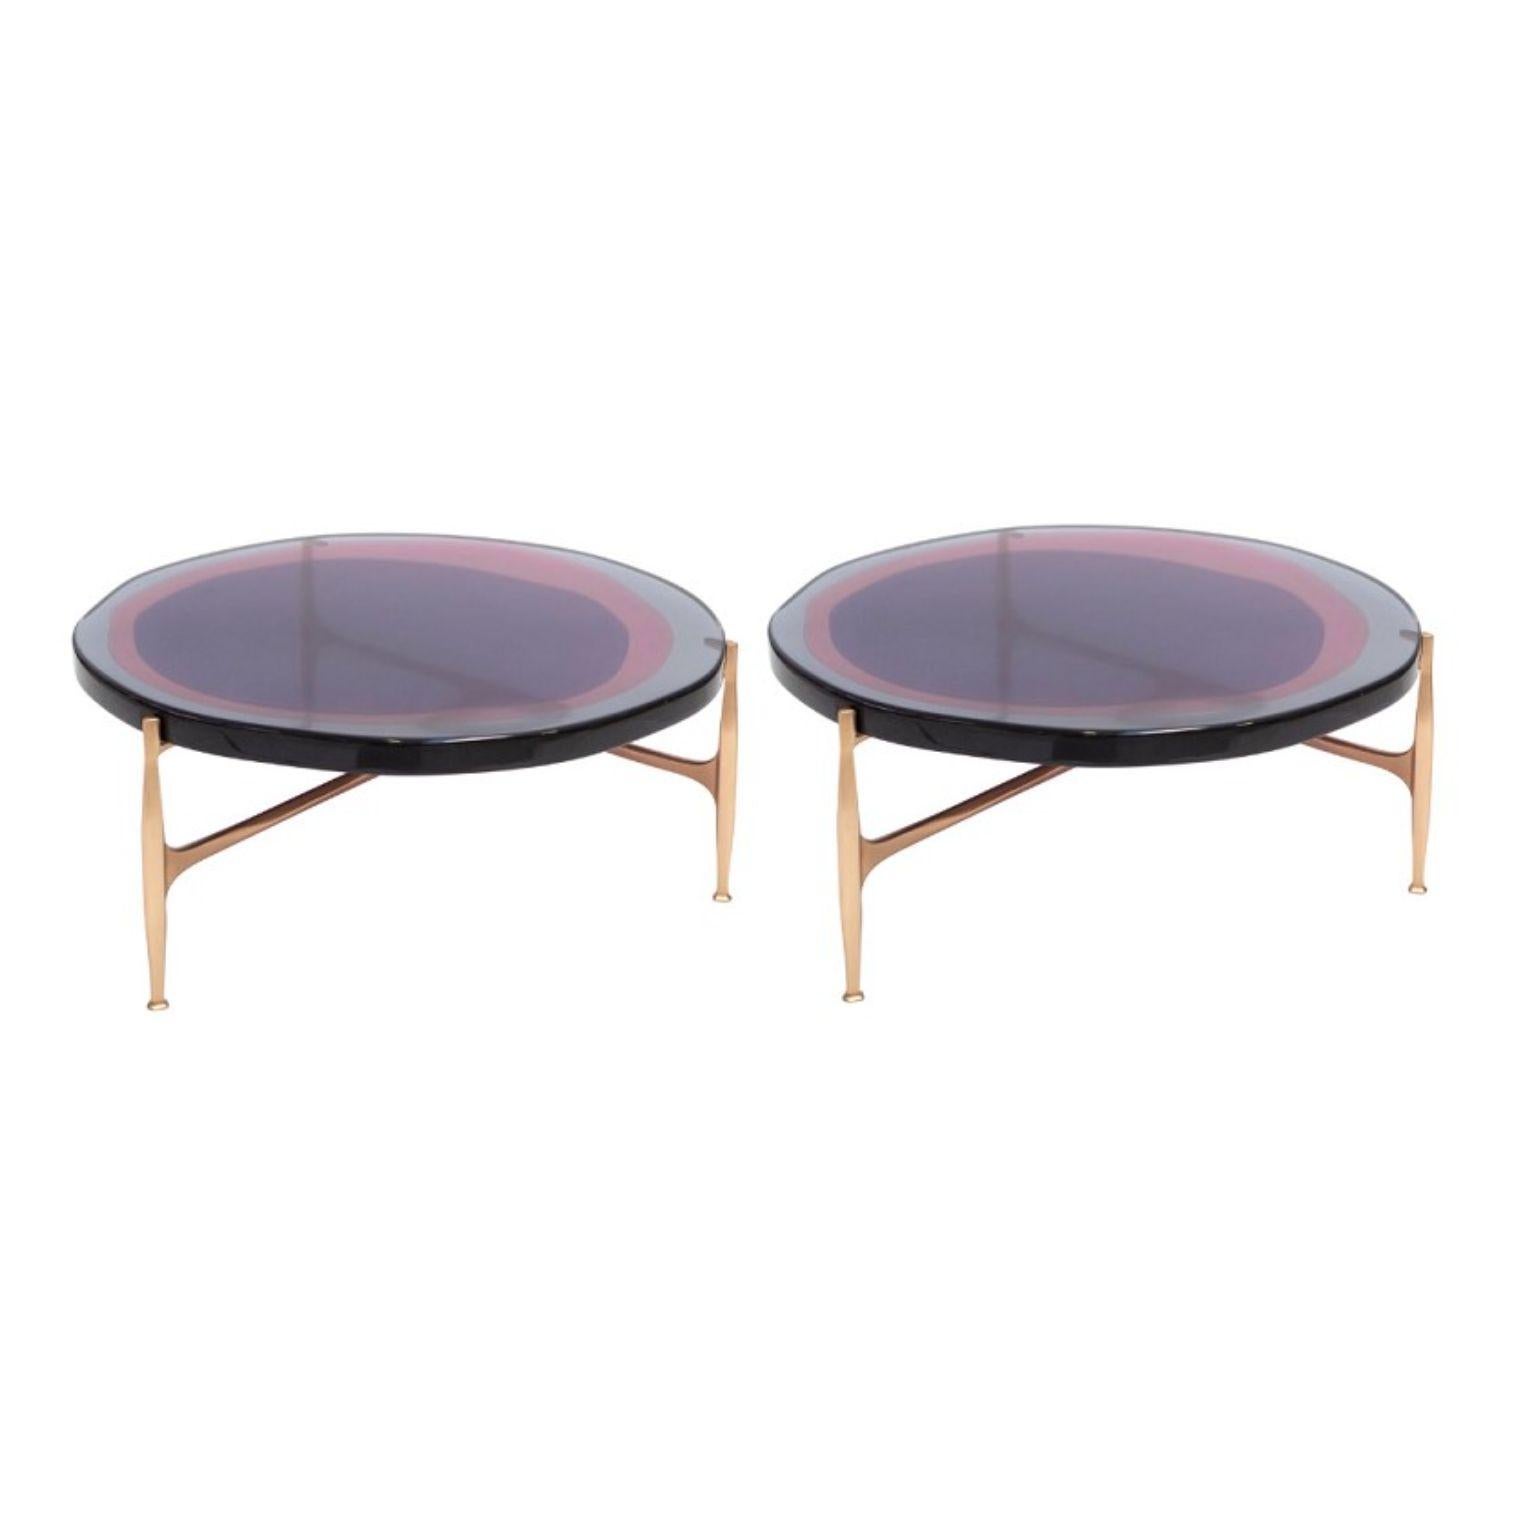 Set of 2 Agatha coffee tables by Draga & Aurel
Dimensions: W 90 x D 90 x H 36
 Top Ø 90 cm
Materials: Resin and bronze

The Agatha coffee tables are featured by irregular circular tops of transparent and
colorful resin sit on a bronze frame